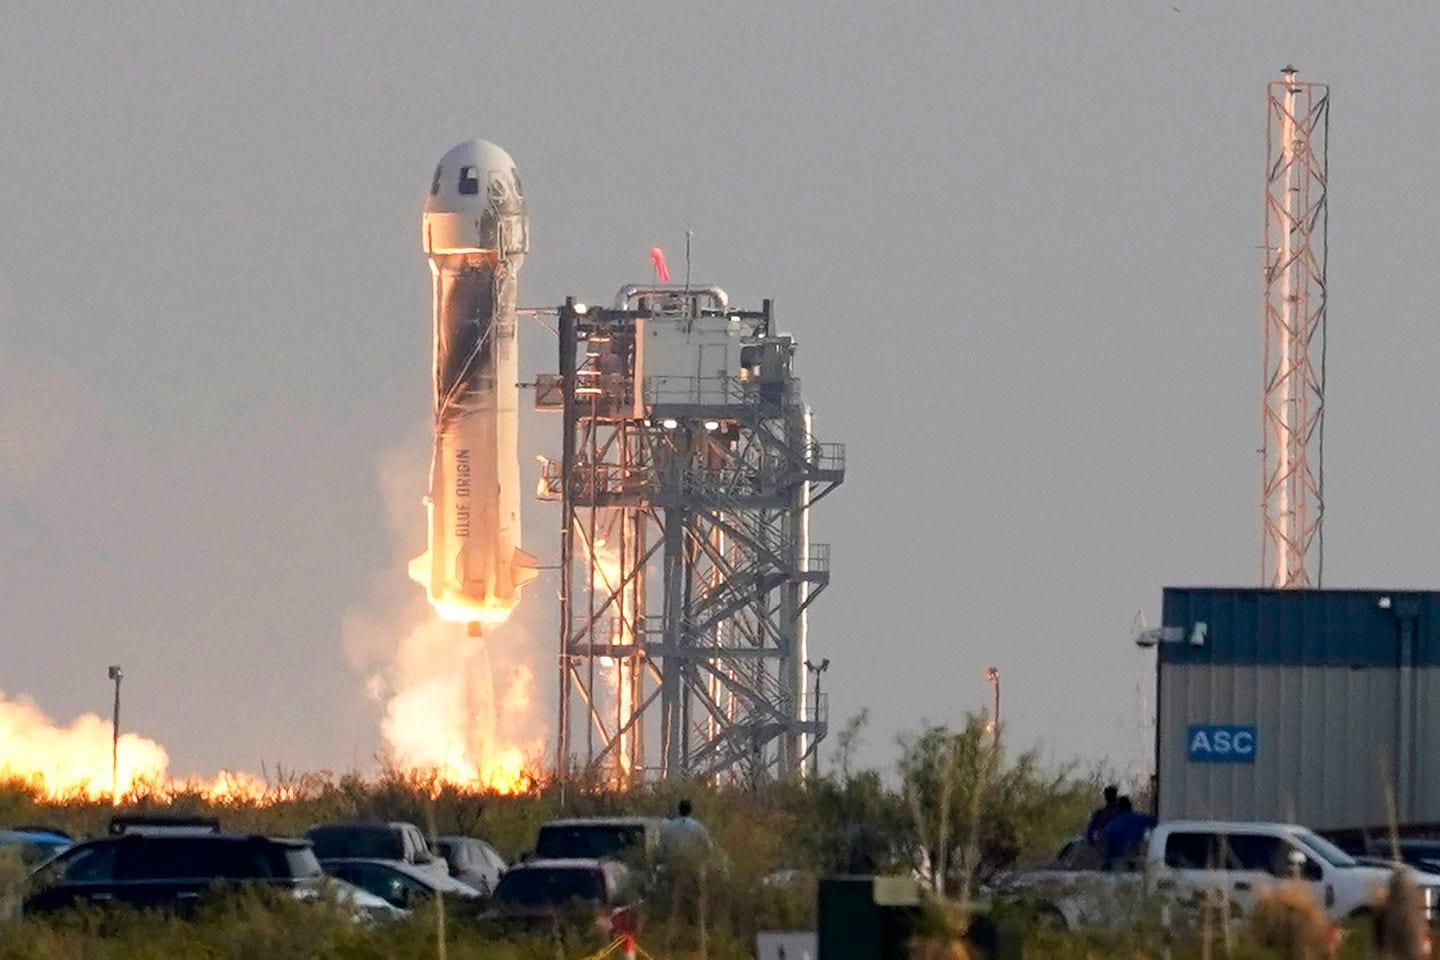 Blue Origin's New Shepard rocket launches carrying passengers Jeff Bezos, founder of Amazon and space tourism company Blue Origin, brother Mark Bezos, Oliver Daemen and Wally Funk, from its spaceport near Van Horn, Texas on July 20, 2021.